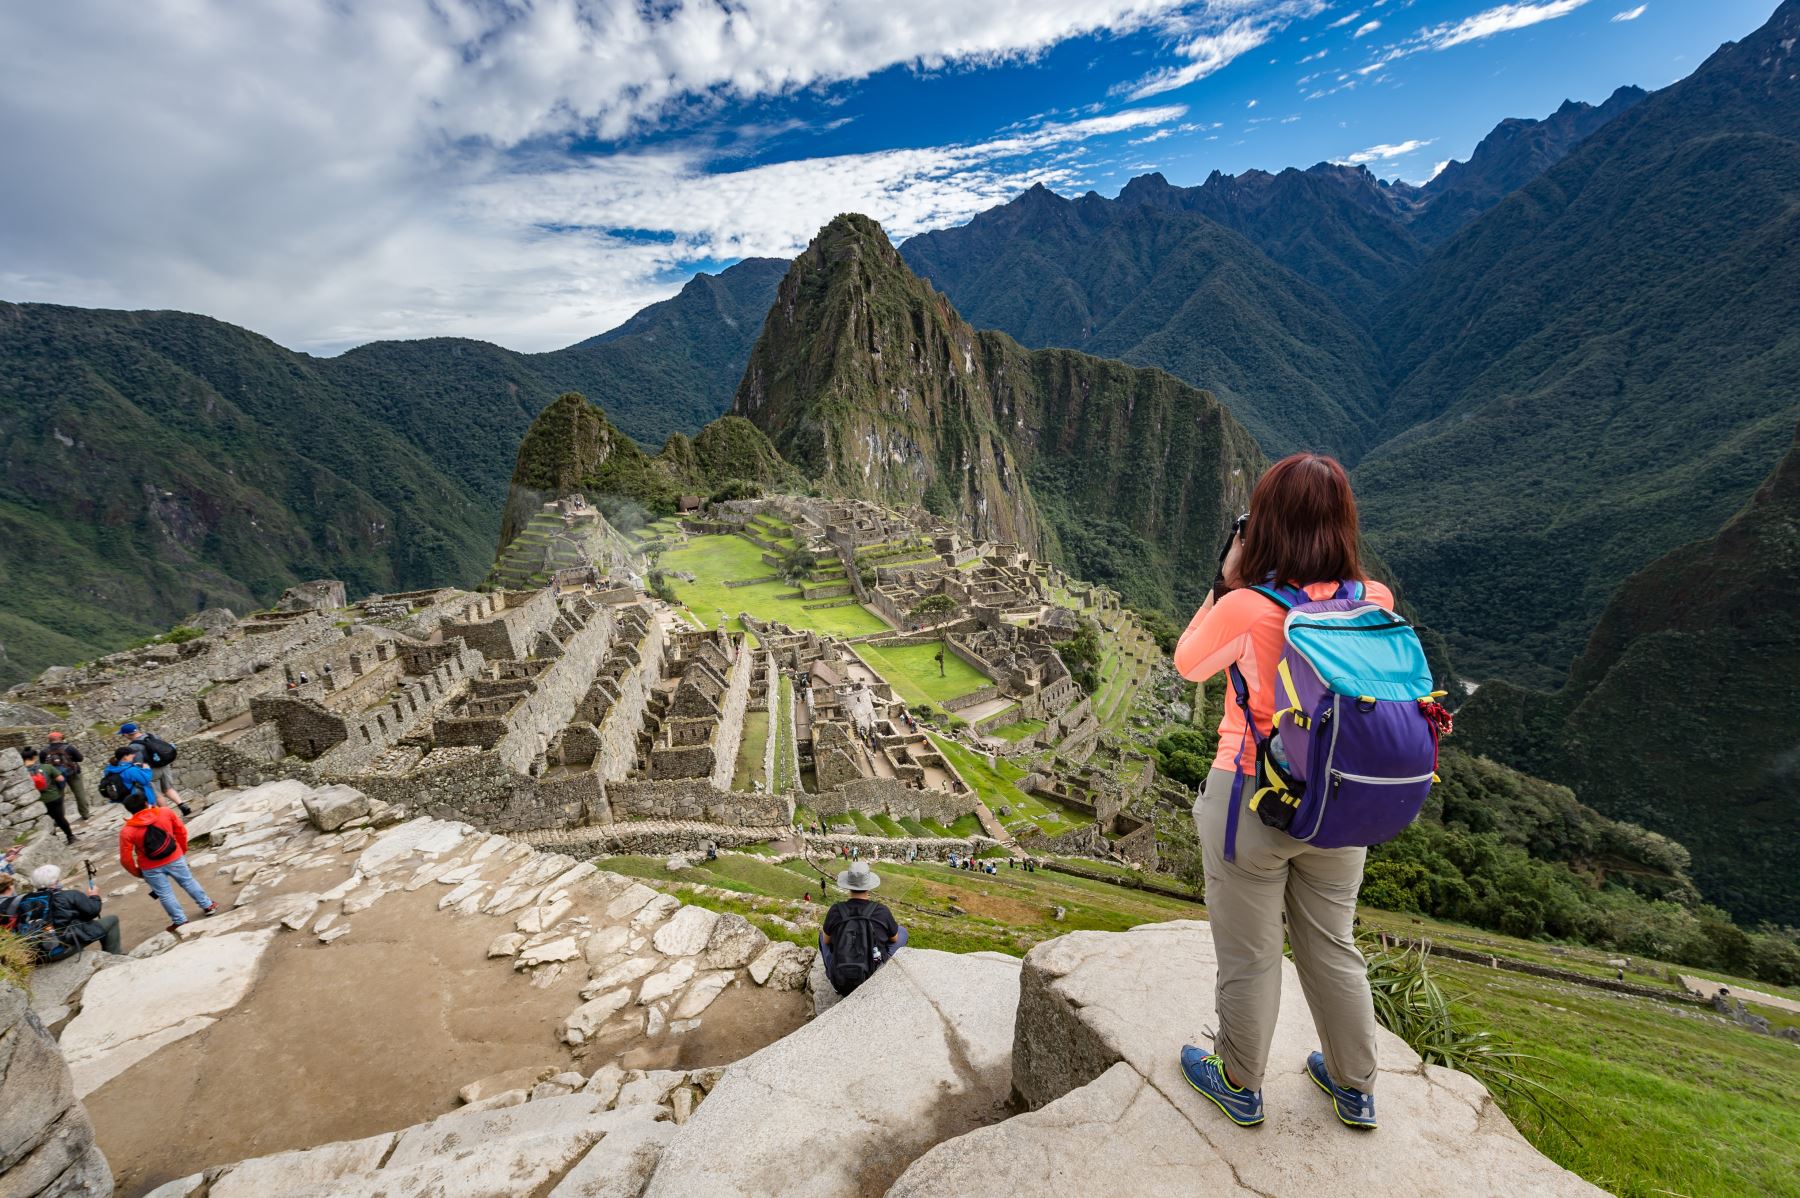 Photo: Ministry of Foreign Trade and Tourism of Peru